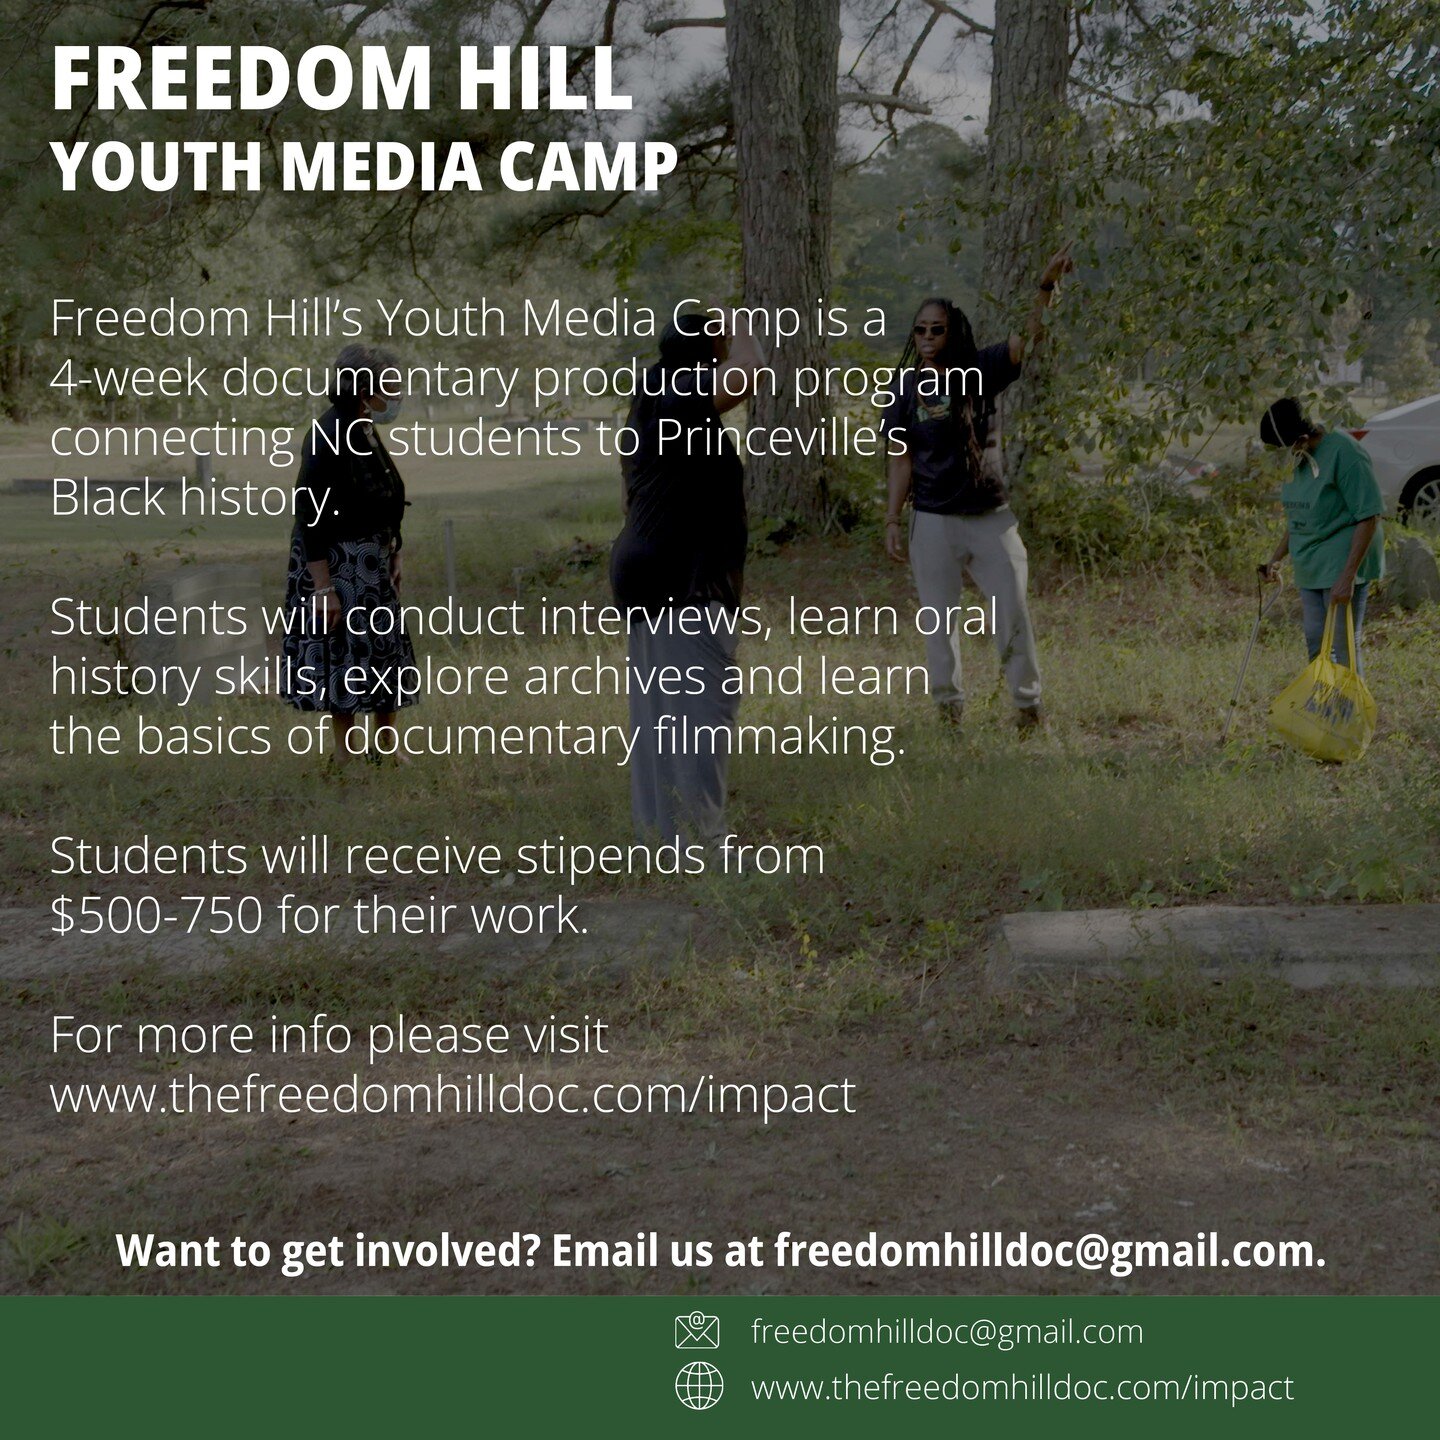 Join @FreedomHillDoc&rsquo;s Youth Media Camp! The Youth Media Camp is a 4-week documentary production program connecting NC students to Princeville&rsquo;s Black history.

Students will receive stipends from $500-750 for their work. You must be betw